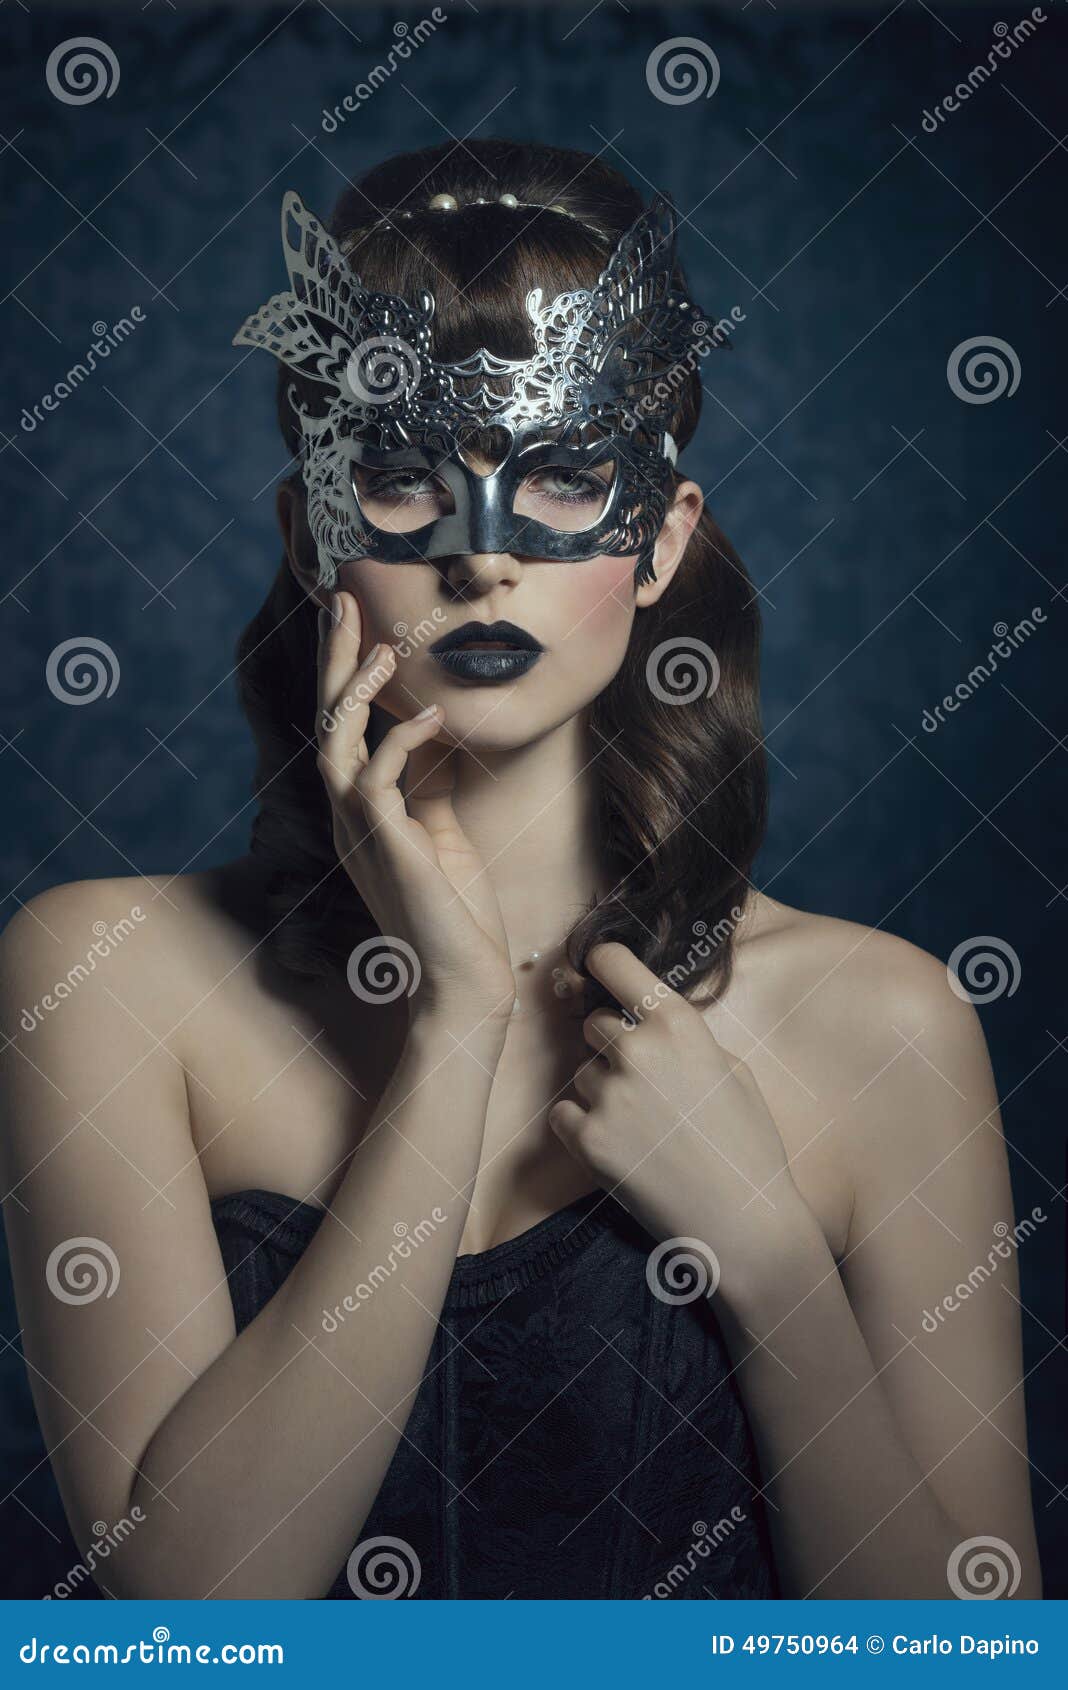 Mysterious Woman Stock Photo - Image: 49750964